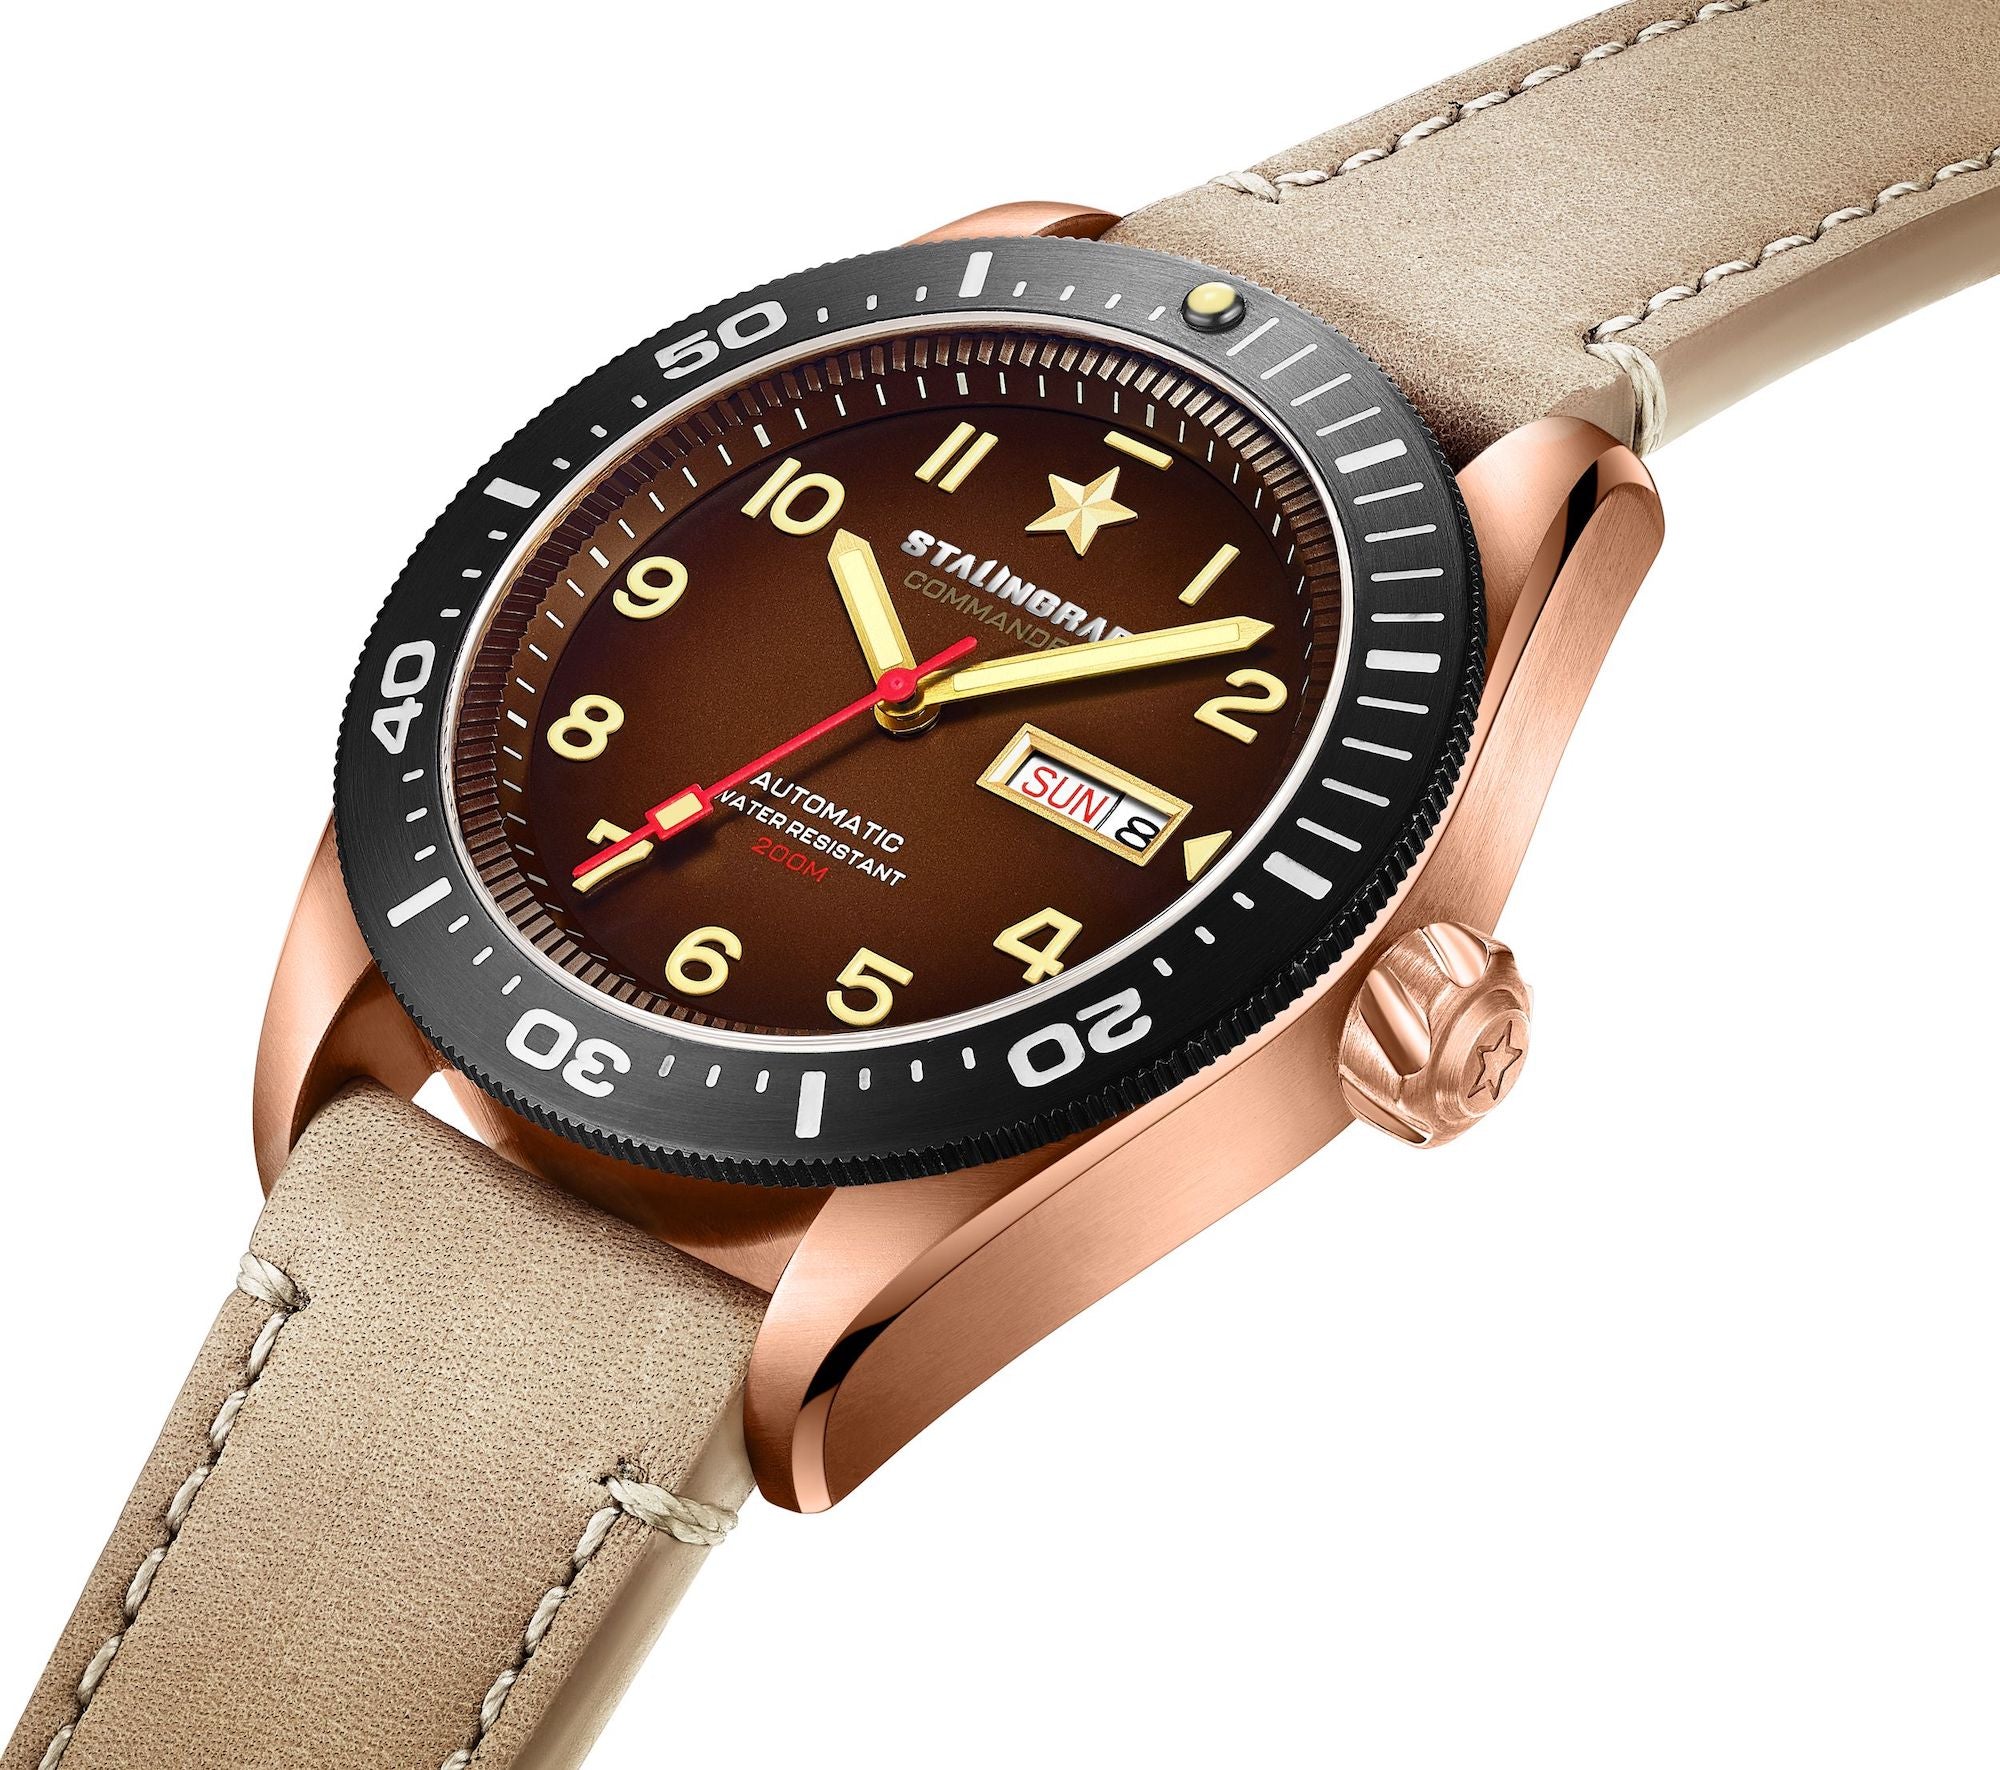 Stalingrad commander watch brown dial and brown leather strap on a white background diagonal view